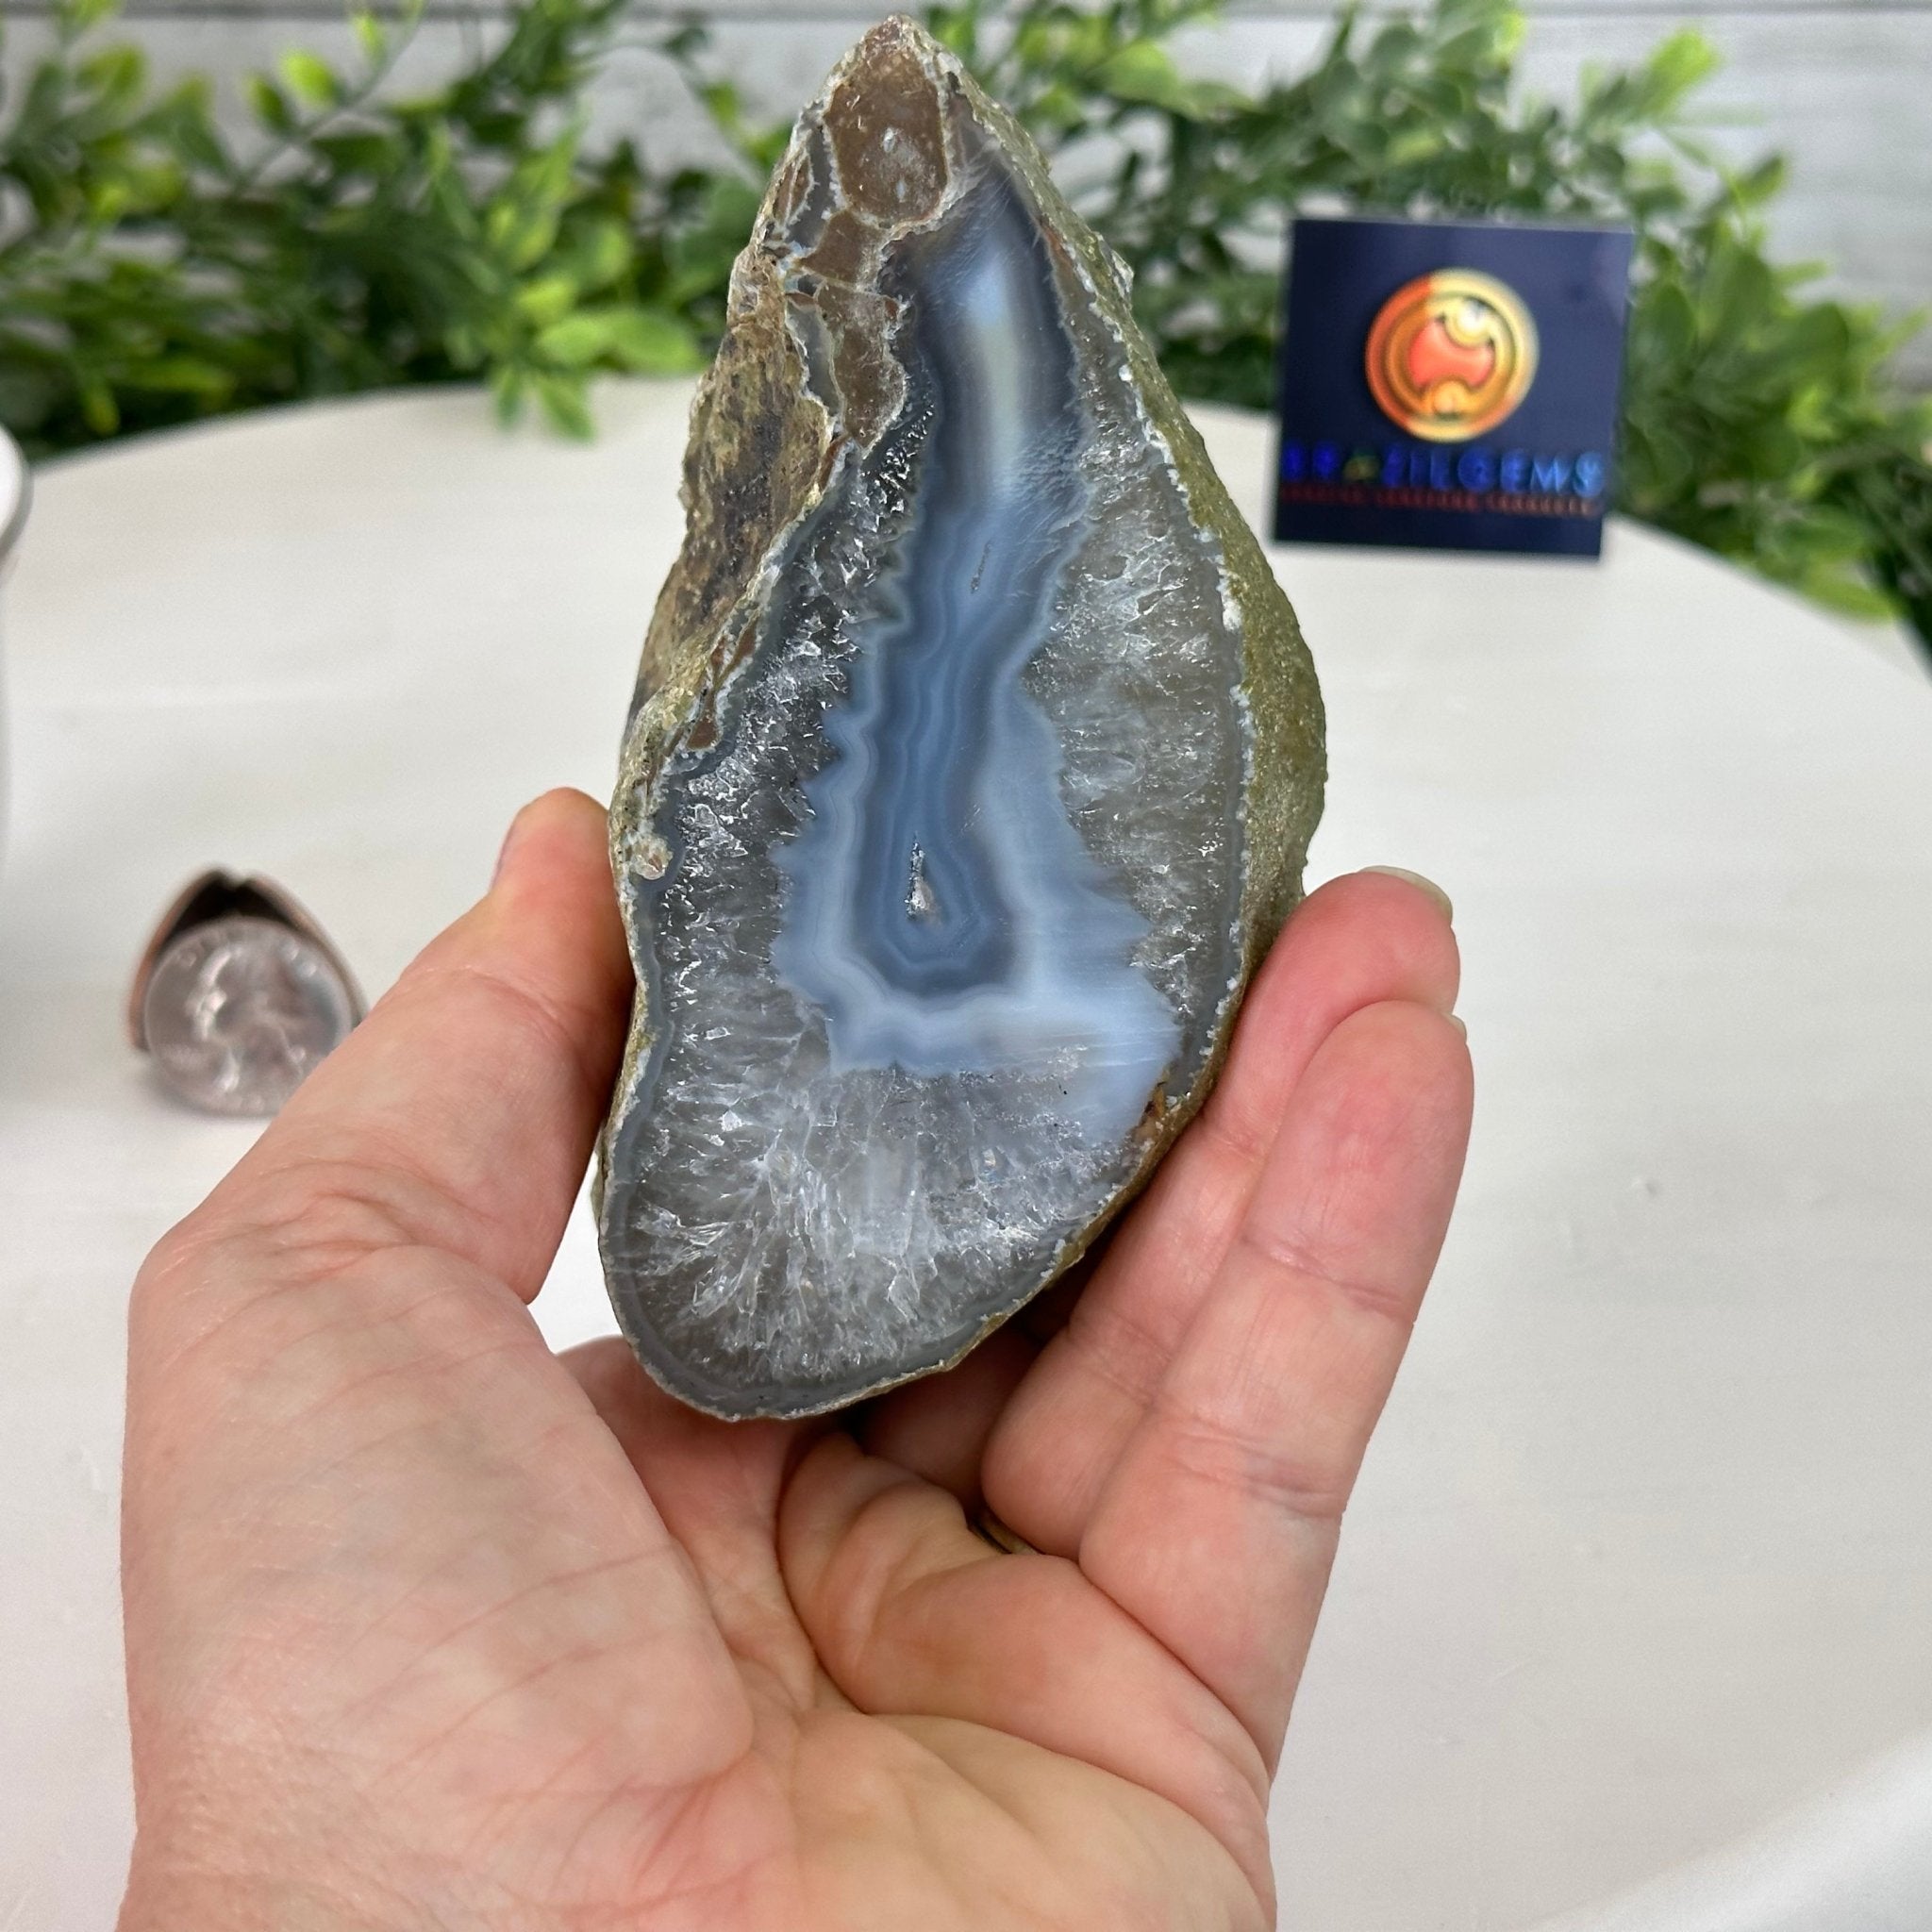 Brazilian Agate Foot & Point Crystal, 1.6 lbs & 3.3" Tall, Model #3102NA-008 by Brazil Gems - Brazil GemsBrazil GemsBrazilian Agate Foot & Point Crystal, 1.6 lbs & 3.3" Tall, Model #3102NA-008 by Brazil GemsCrystal Points3102NA-008